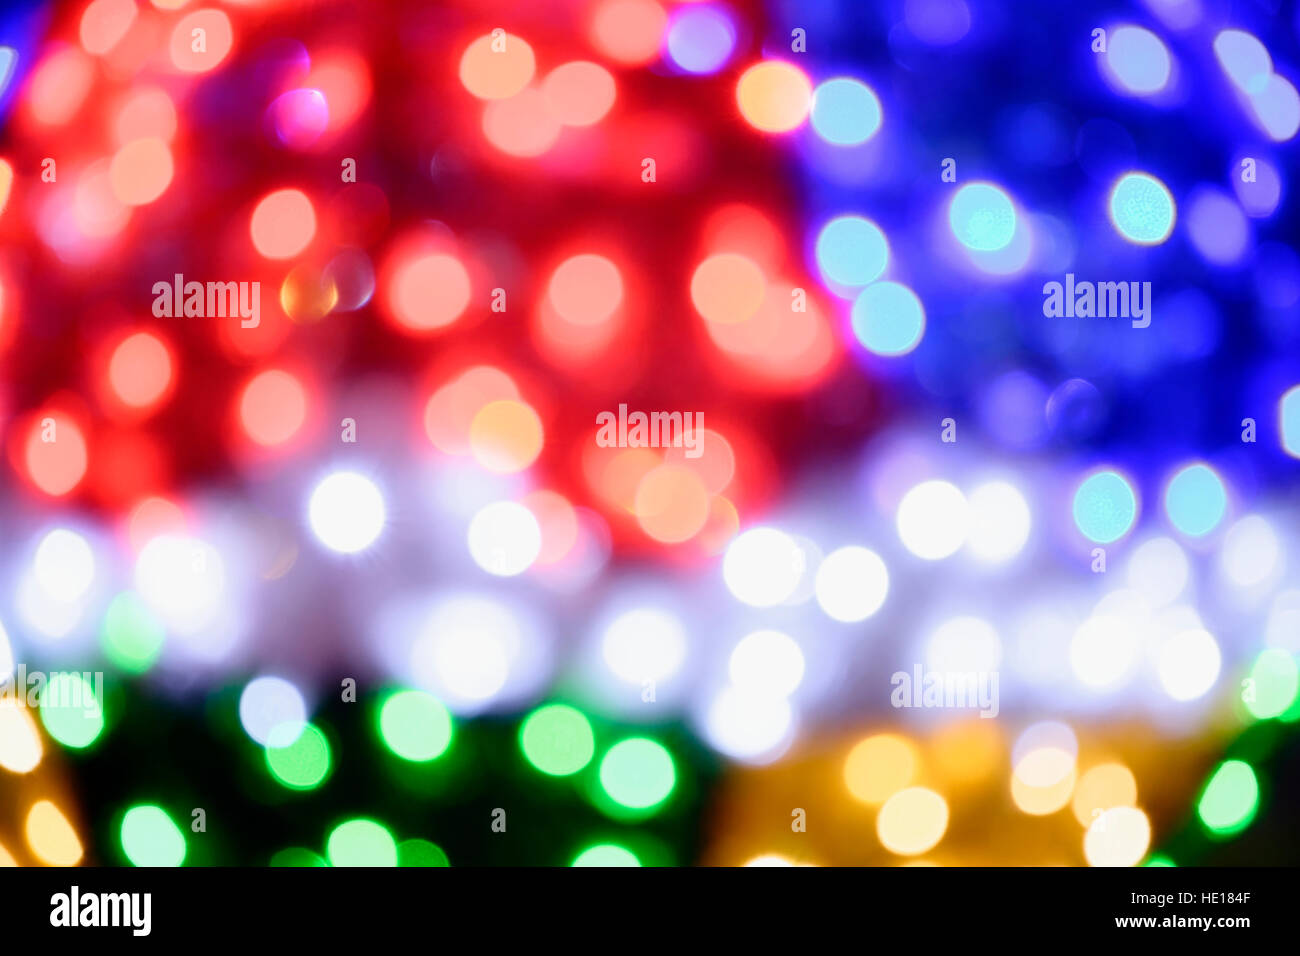 night lights of various colors photographed out of focus Stock Photo